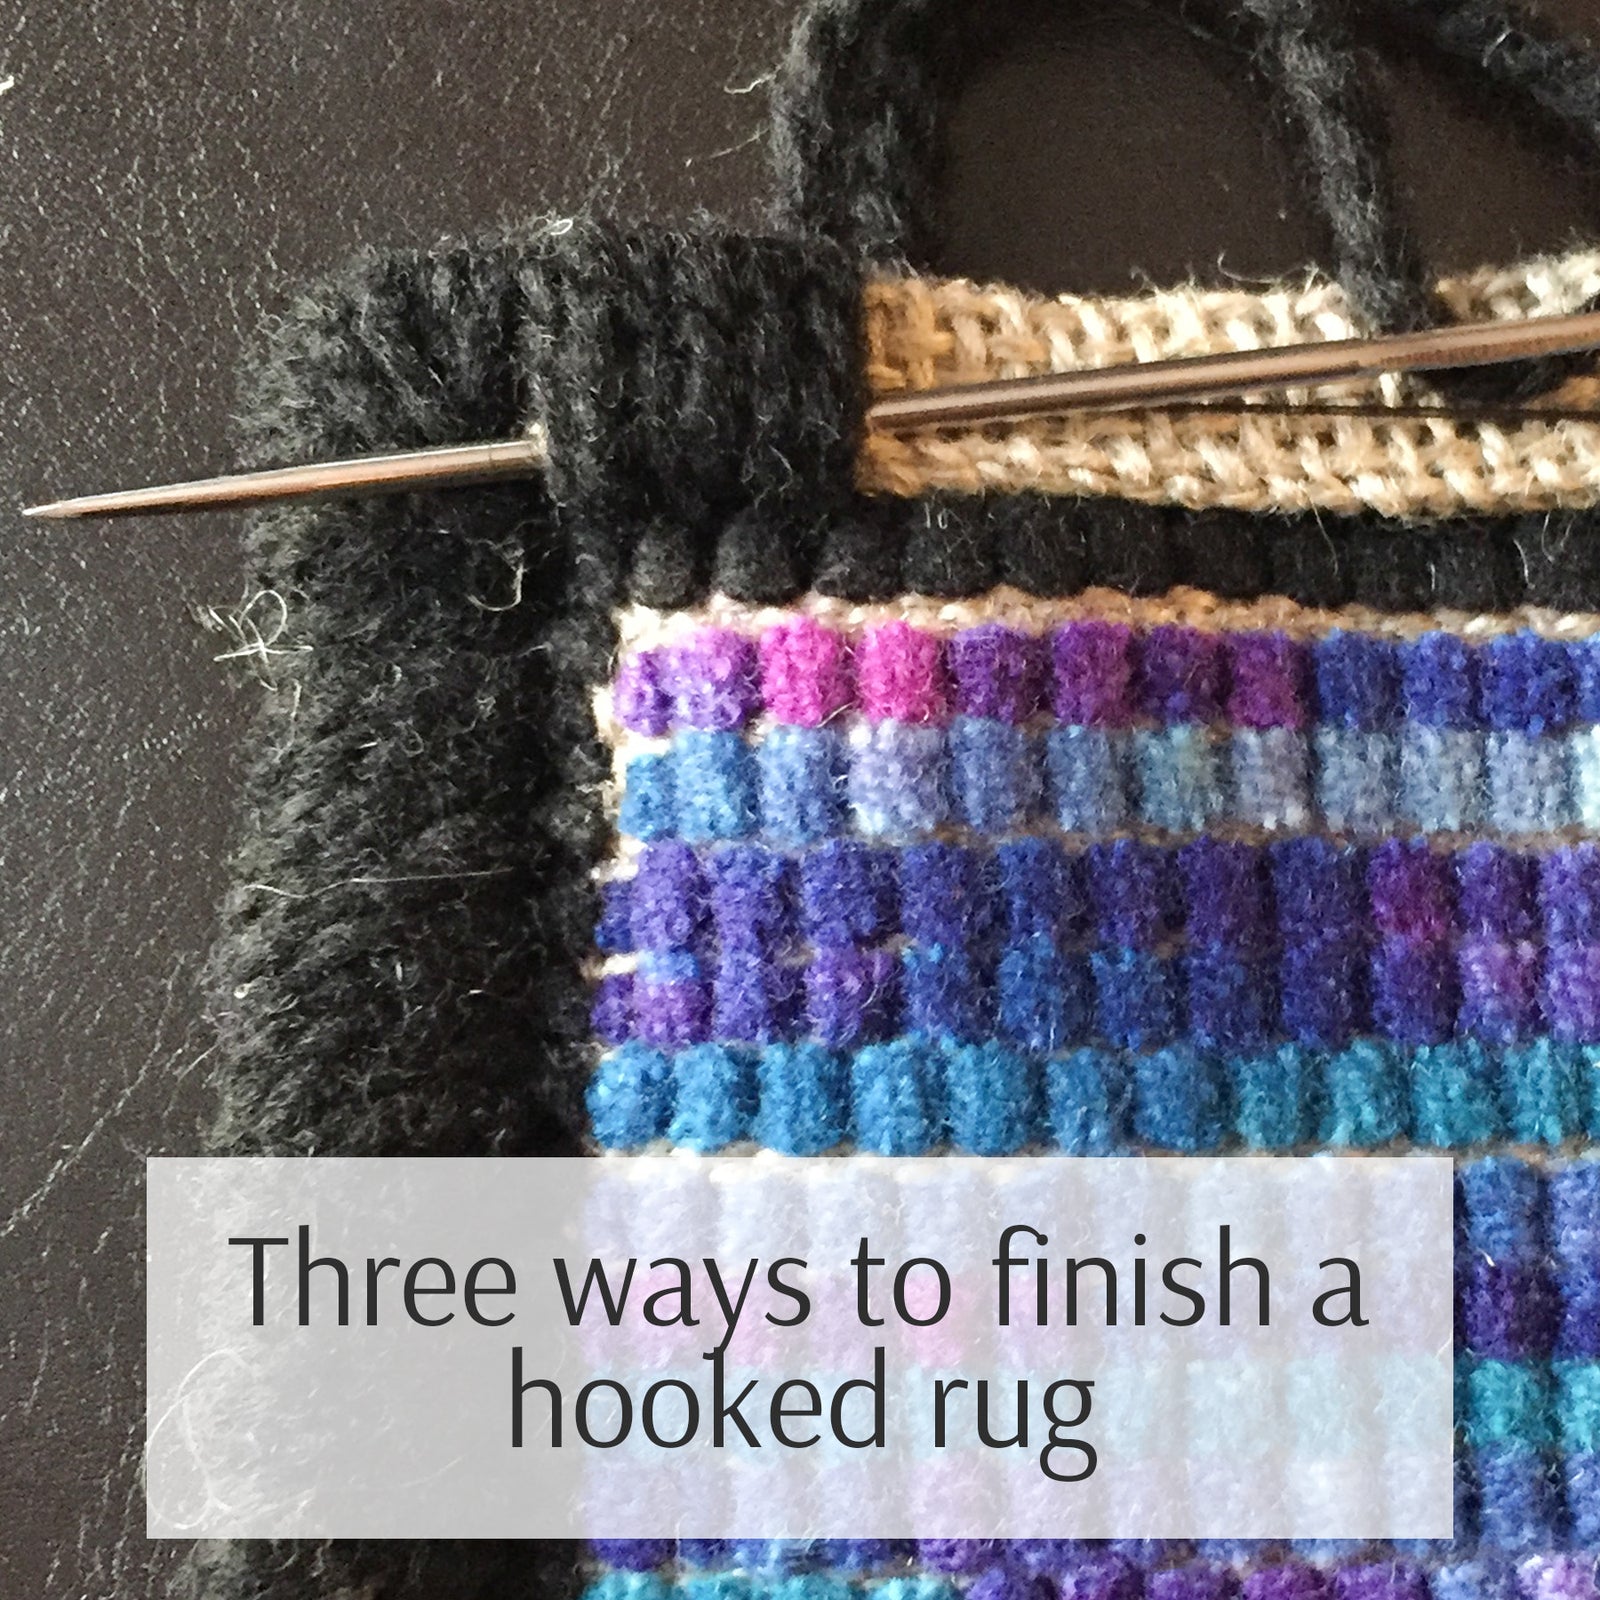 Why Hook With Yarn? Hooking with yarn vs. fabric strips – Hooking With Yarn